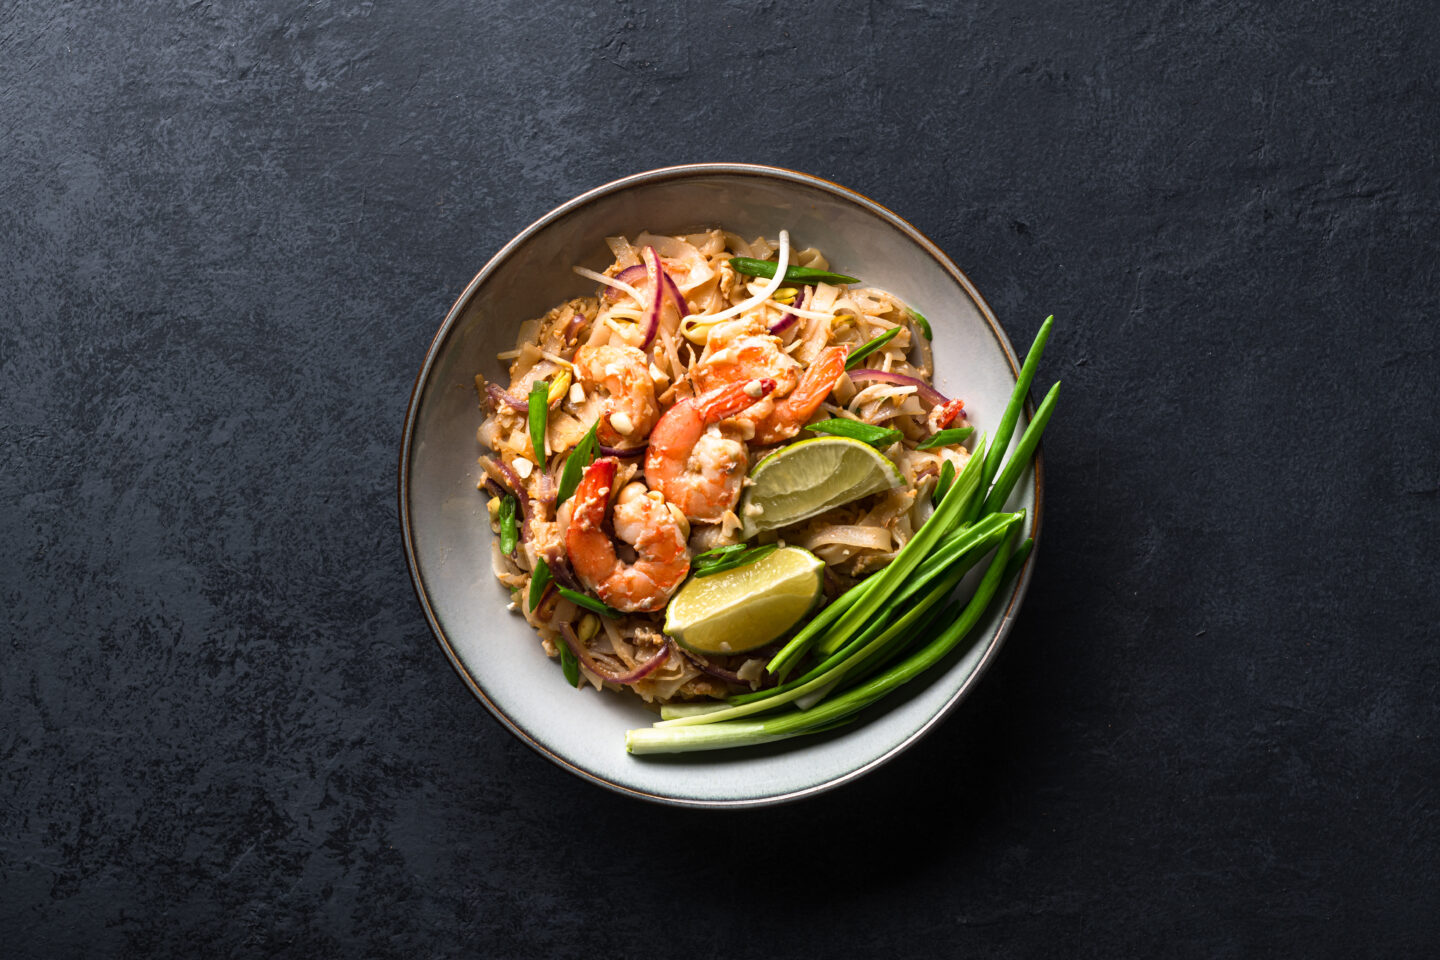 Pad,Thai,With,Shrimp,And,Vegetables,On,A,Dark,Background,